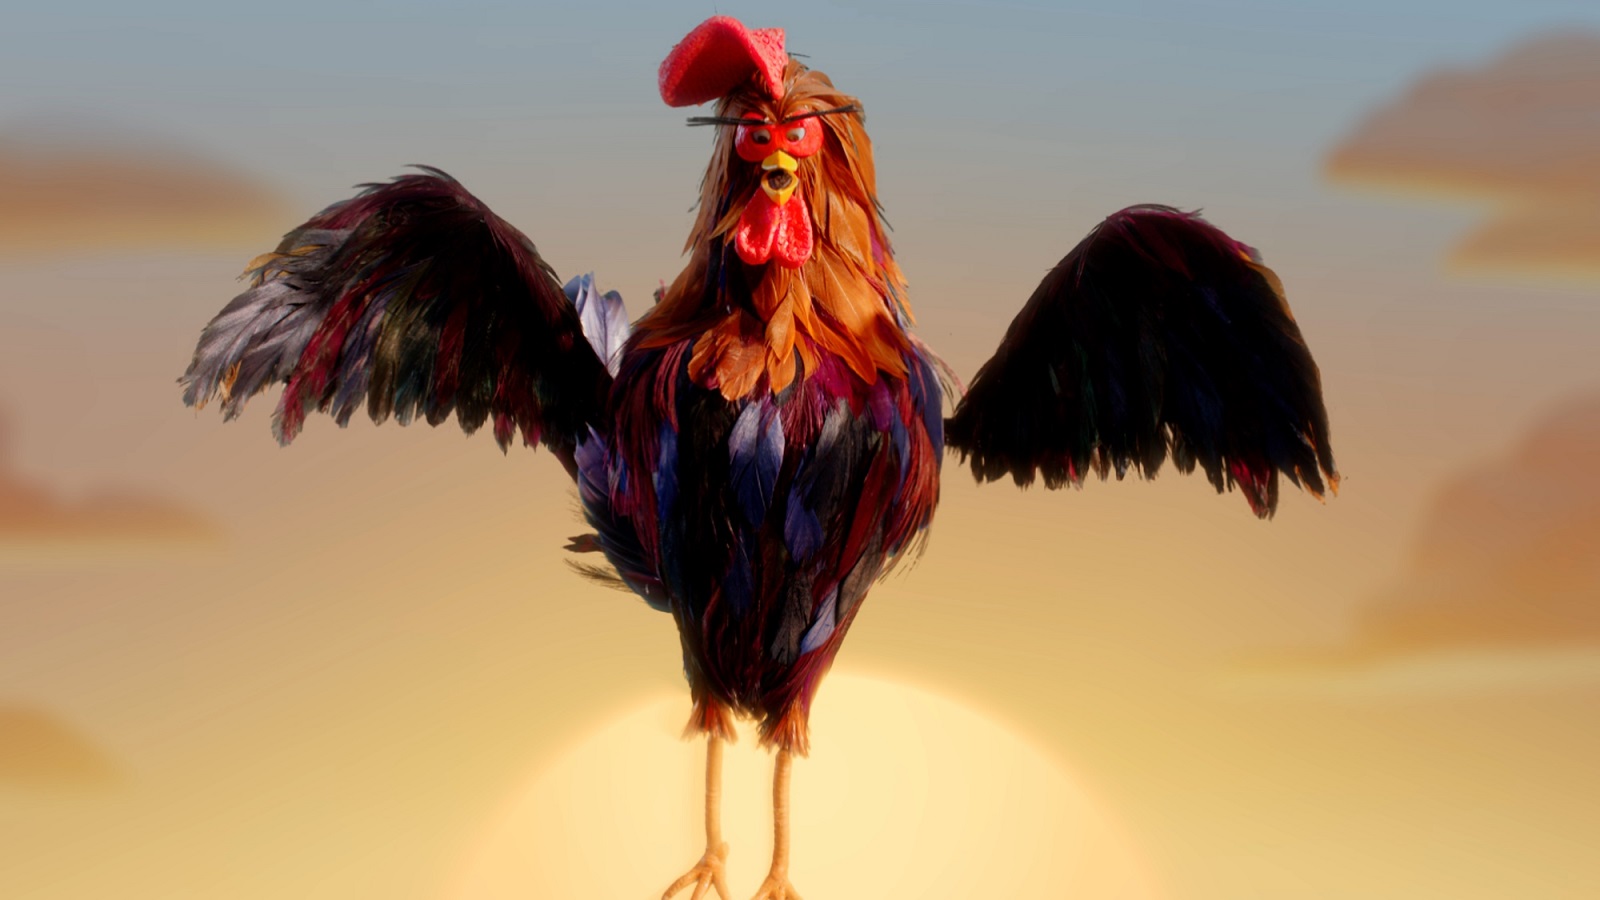 Well-Rested Rooster Spreads the Joy of Having a Good Night’s Sleep